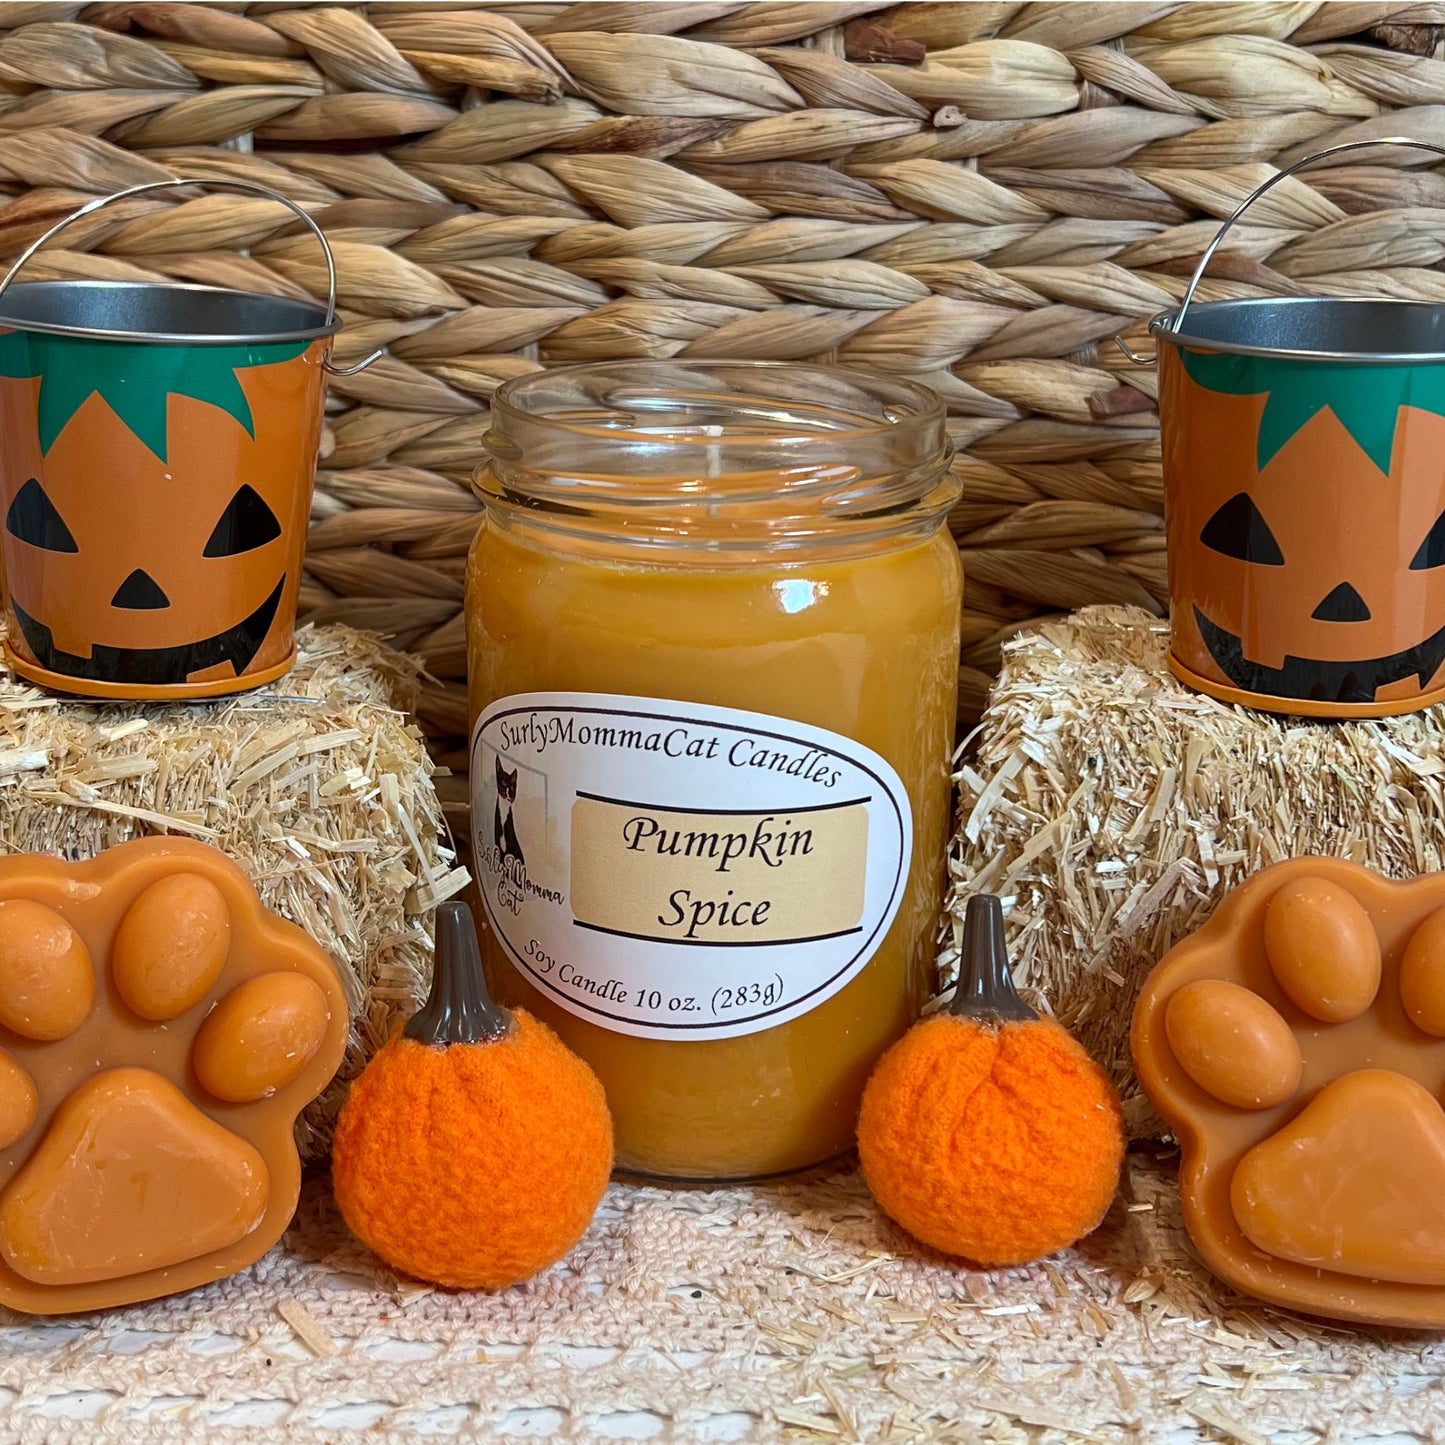 Orange Pumpkin Spice soy glass jar candle, with wax paw prints. two small pumpkin pails sitting on tiny decorative hay bales.